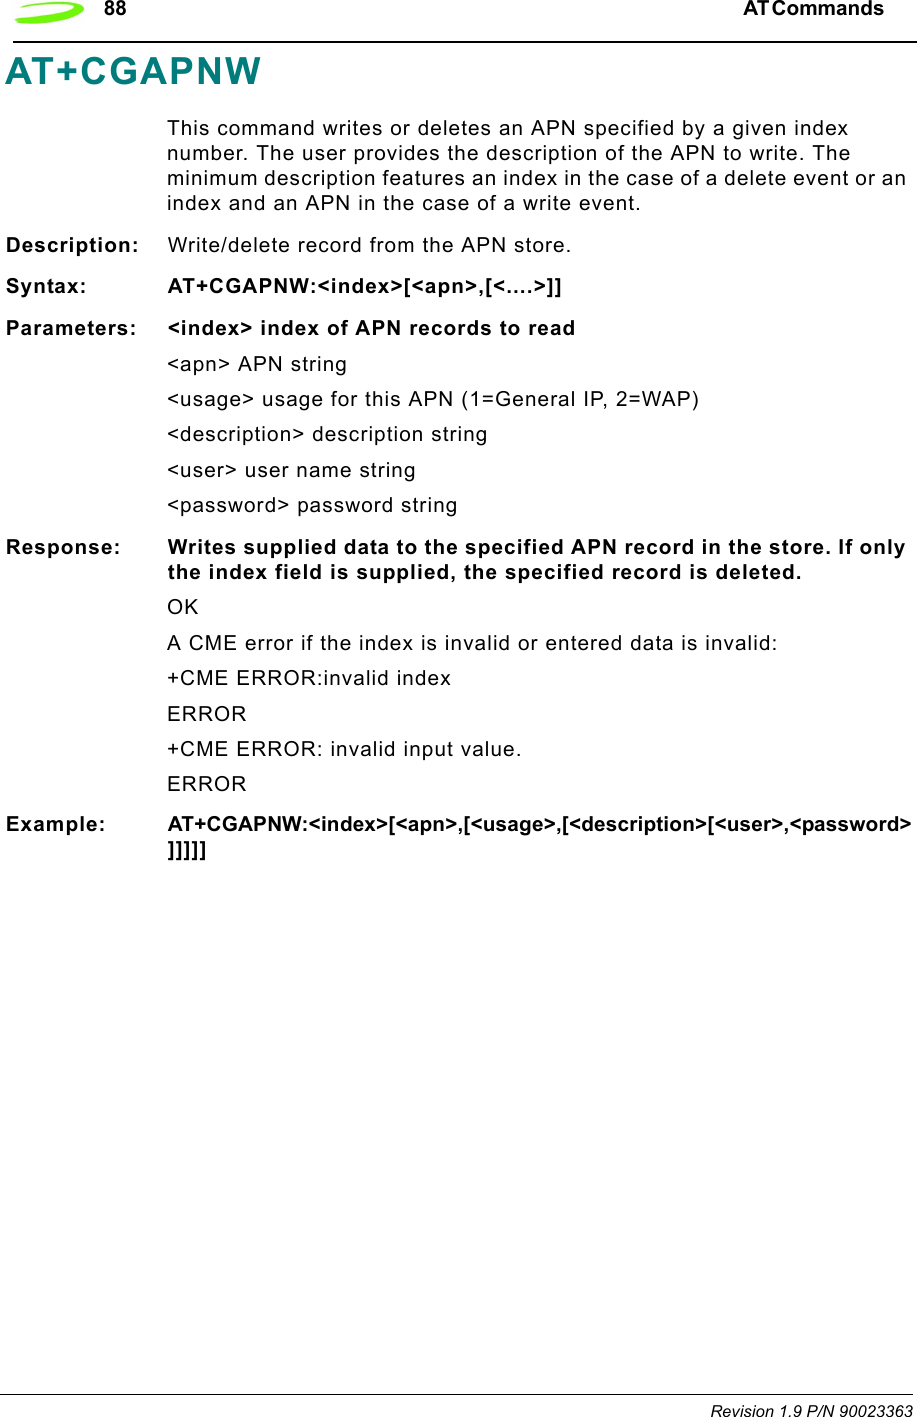 88 AT Commands  Revision 1.9 P/N 90023363AT+CGAPNWThis command writes or deletes an APN specified by a given index number. The user provides the description of the APN to write. The minimum description features an index in the case of a delete event or an index and an APN in the case of a write event.Description: Write/delete record from the APN store.Syntax: AT+CGAPNW:&lt;index&gt;[&lt;apn&gt;,[&lt;....&gt;]]Parameters: &lt;index&gt; index of APN records to read&lt;apn&gt; APN string&lt;usage&gt; usage for this APN (1=General IP, 2=WAP)&lt;description&gt; description string&lt;user&gt; user name string&lt;password&gt; password stringResponse: Writes supplied data to the specified APN record in the store. If only the index field is supplied, the specified record is deleted.OKA CME error if the index is invalid or entered data is invalid:+CME ERROR:invalid indexERROR+CME ERROR: invalid input value. ERRORExample: AT+CGAPNW:&lt;index&gt;[&lt;apn&gt;,[&lt;usage&gt;,[&lt;description&gt;[&lt;user&gt;,&lt;password&gt;]]]]]